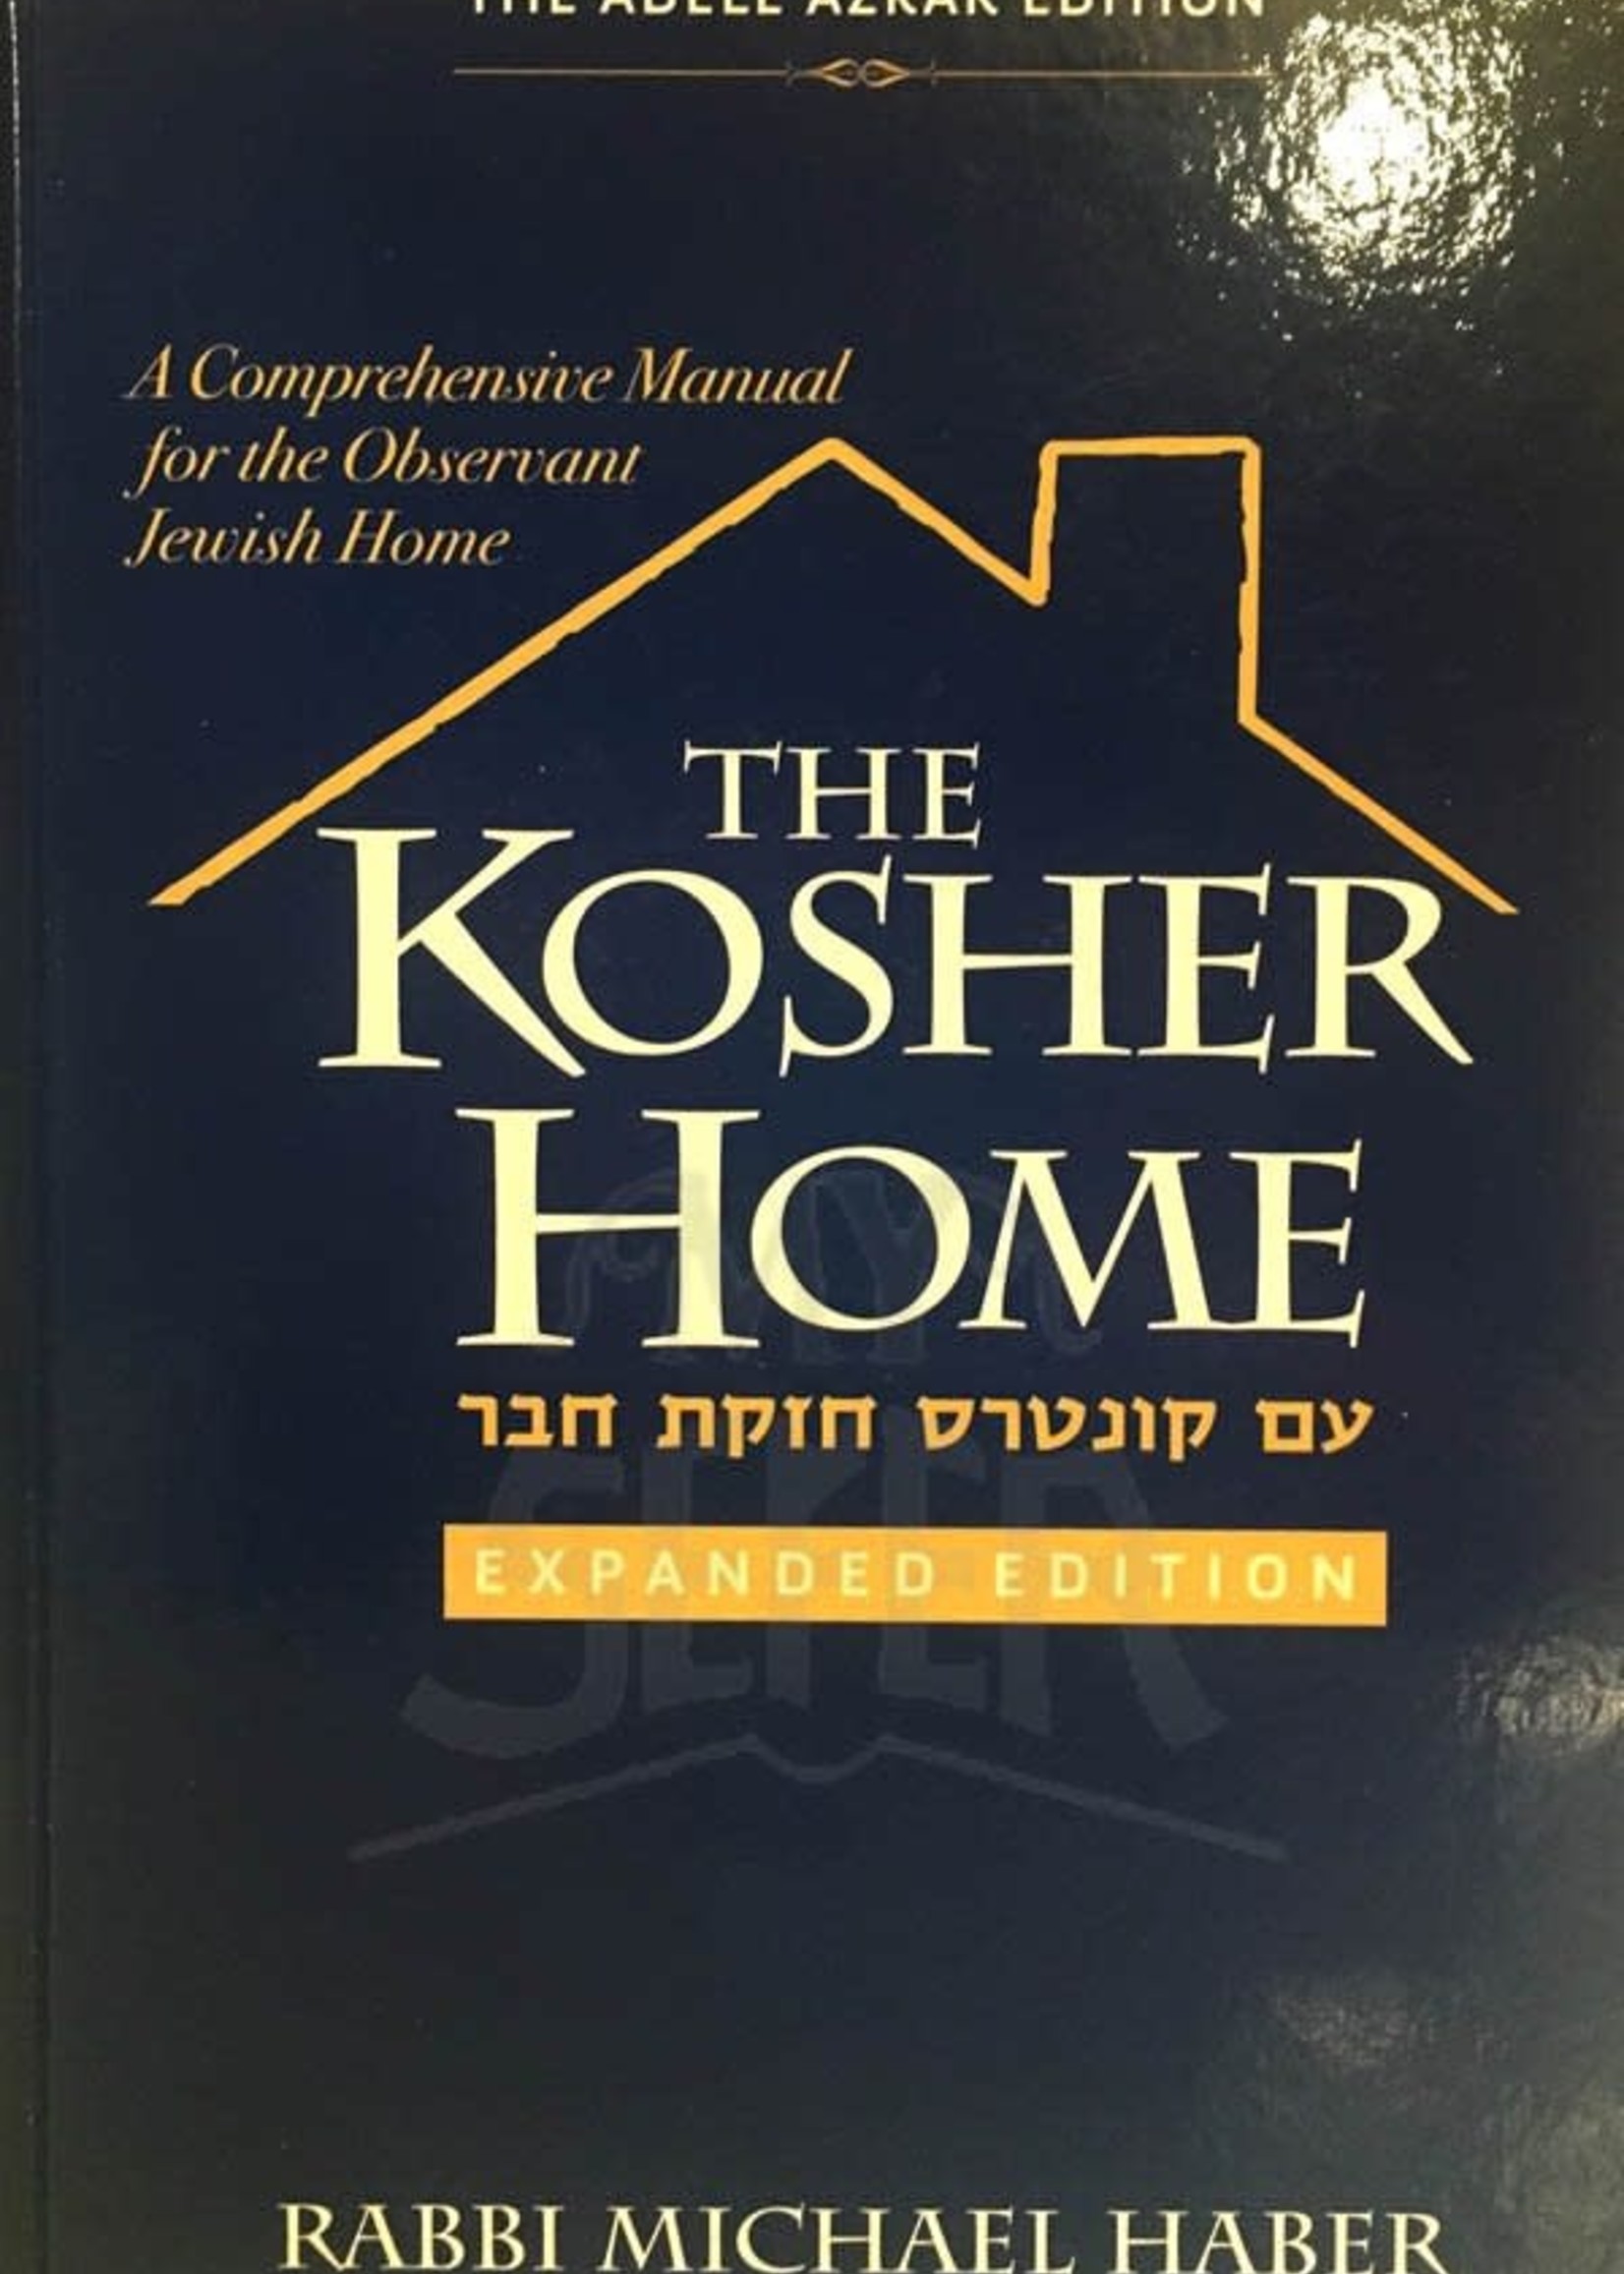 The Kosher Home - A Comprehensive Manual for the Observant Jewish Home